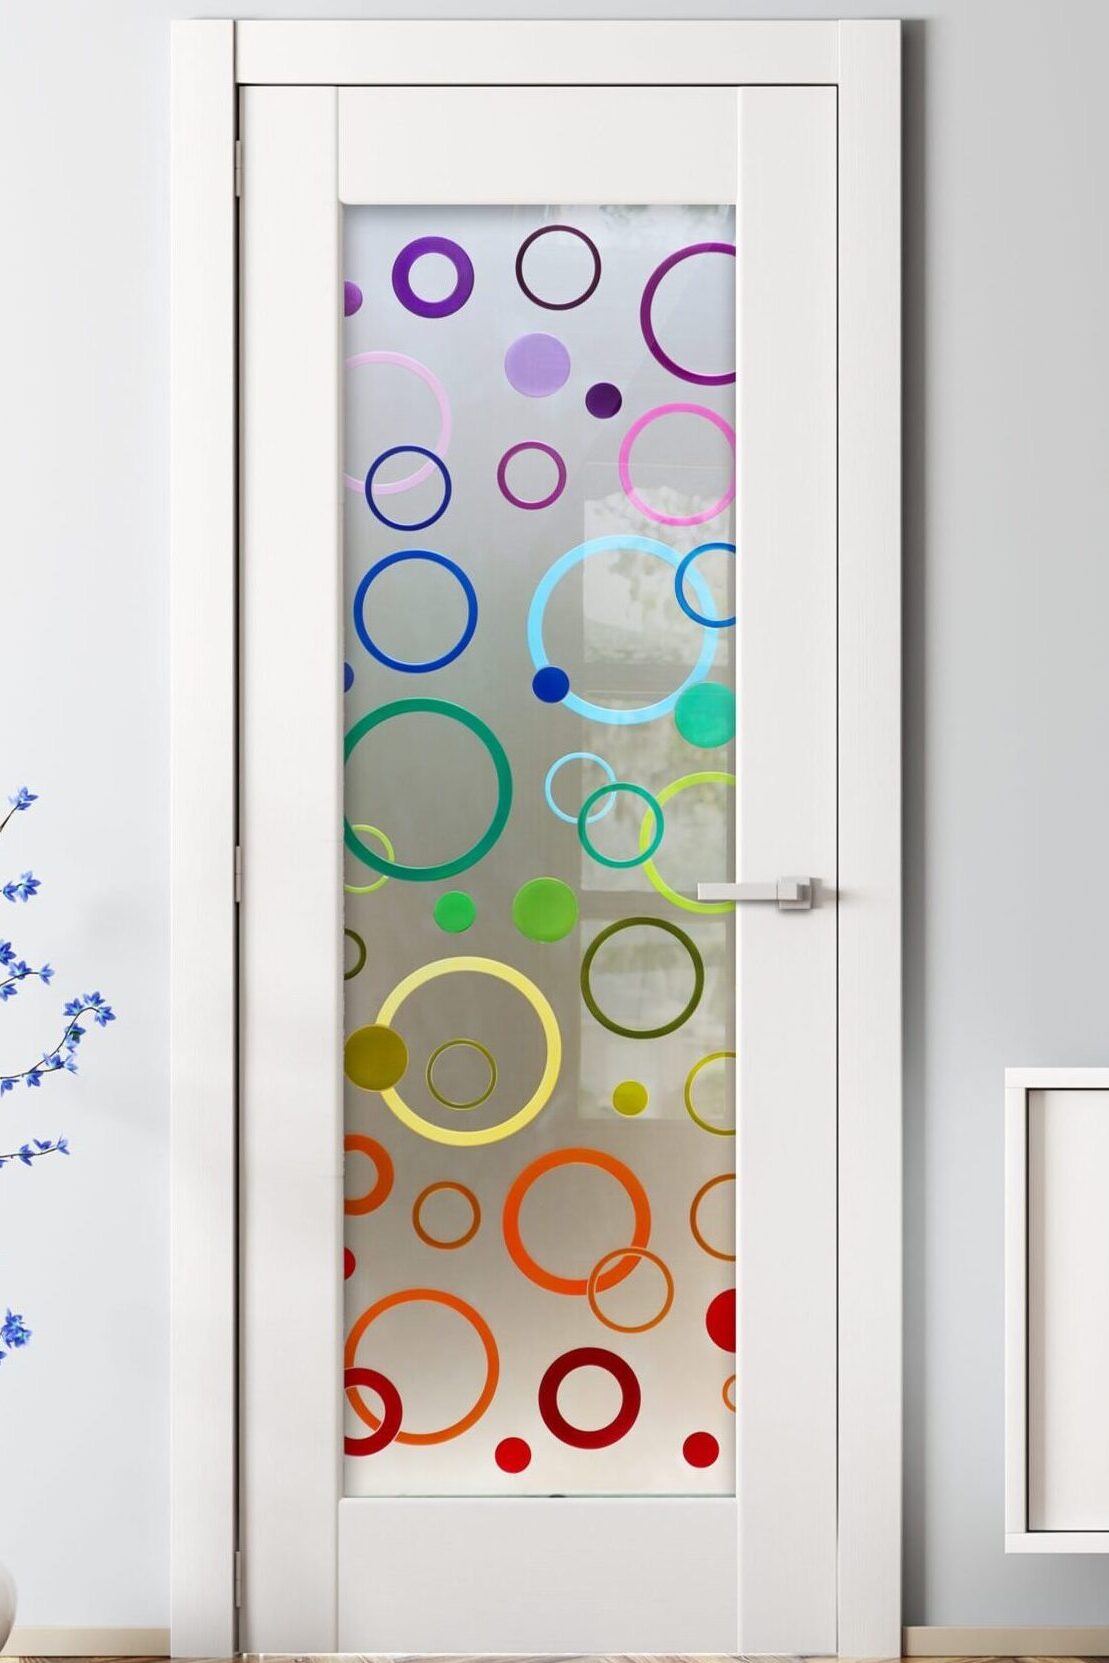 Glass Pantry Doors Interior Frosted Glass Doors Circularity Private 3D Painted Mid-Century Modern Decor Geometric Design Pantry Door Sans Soucie